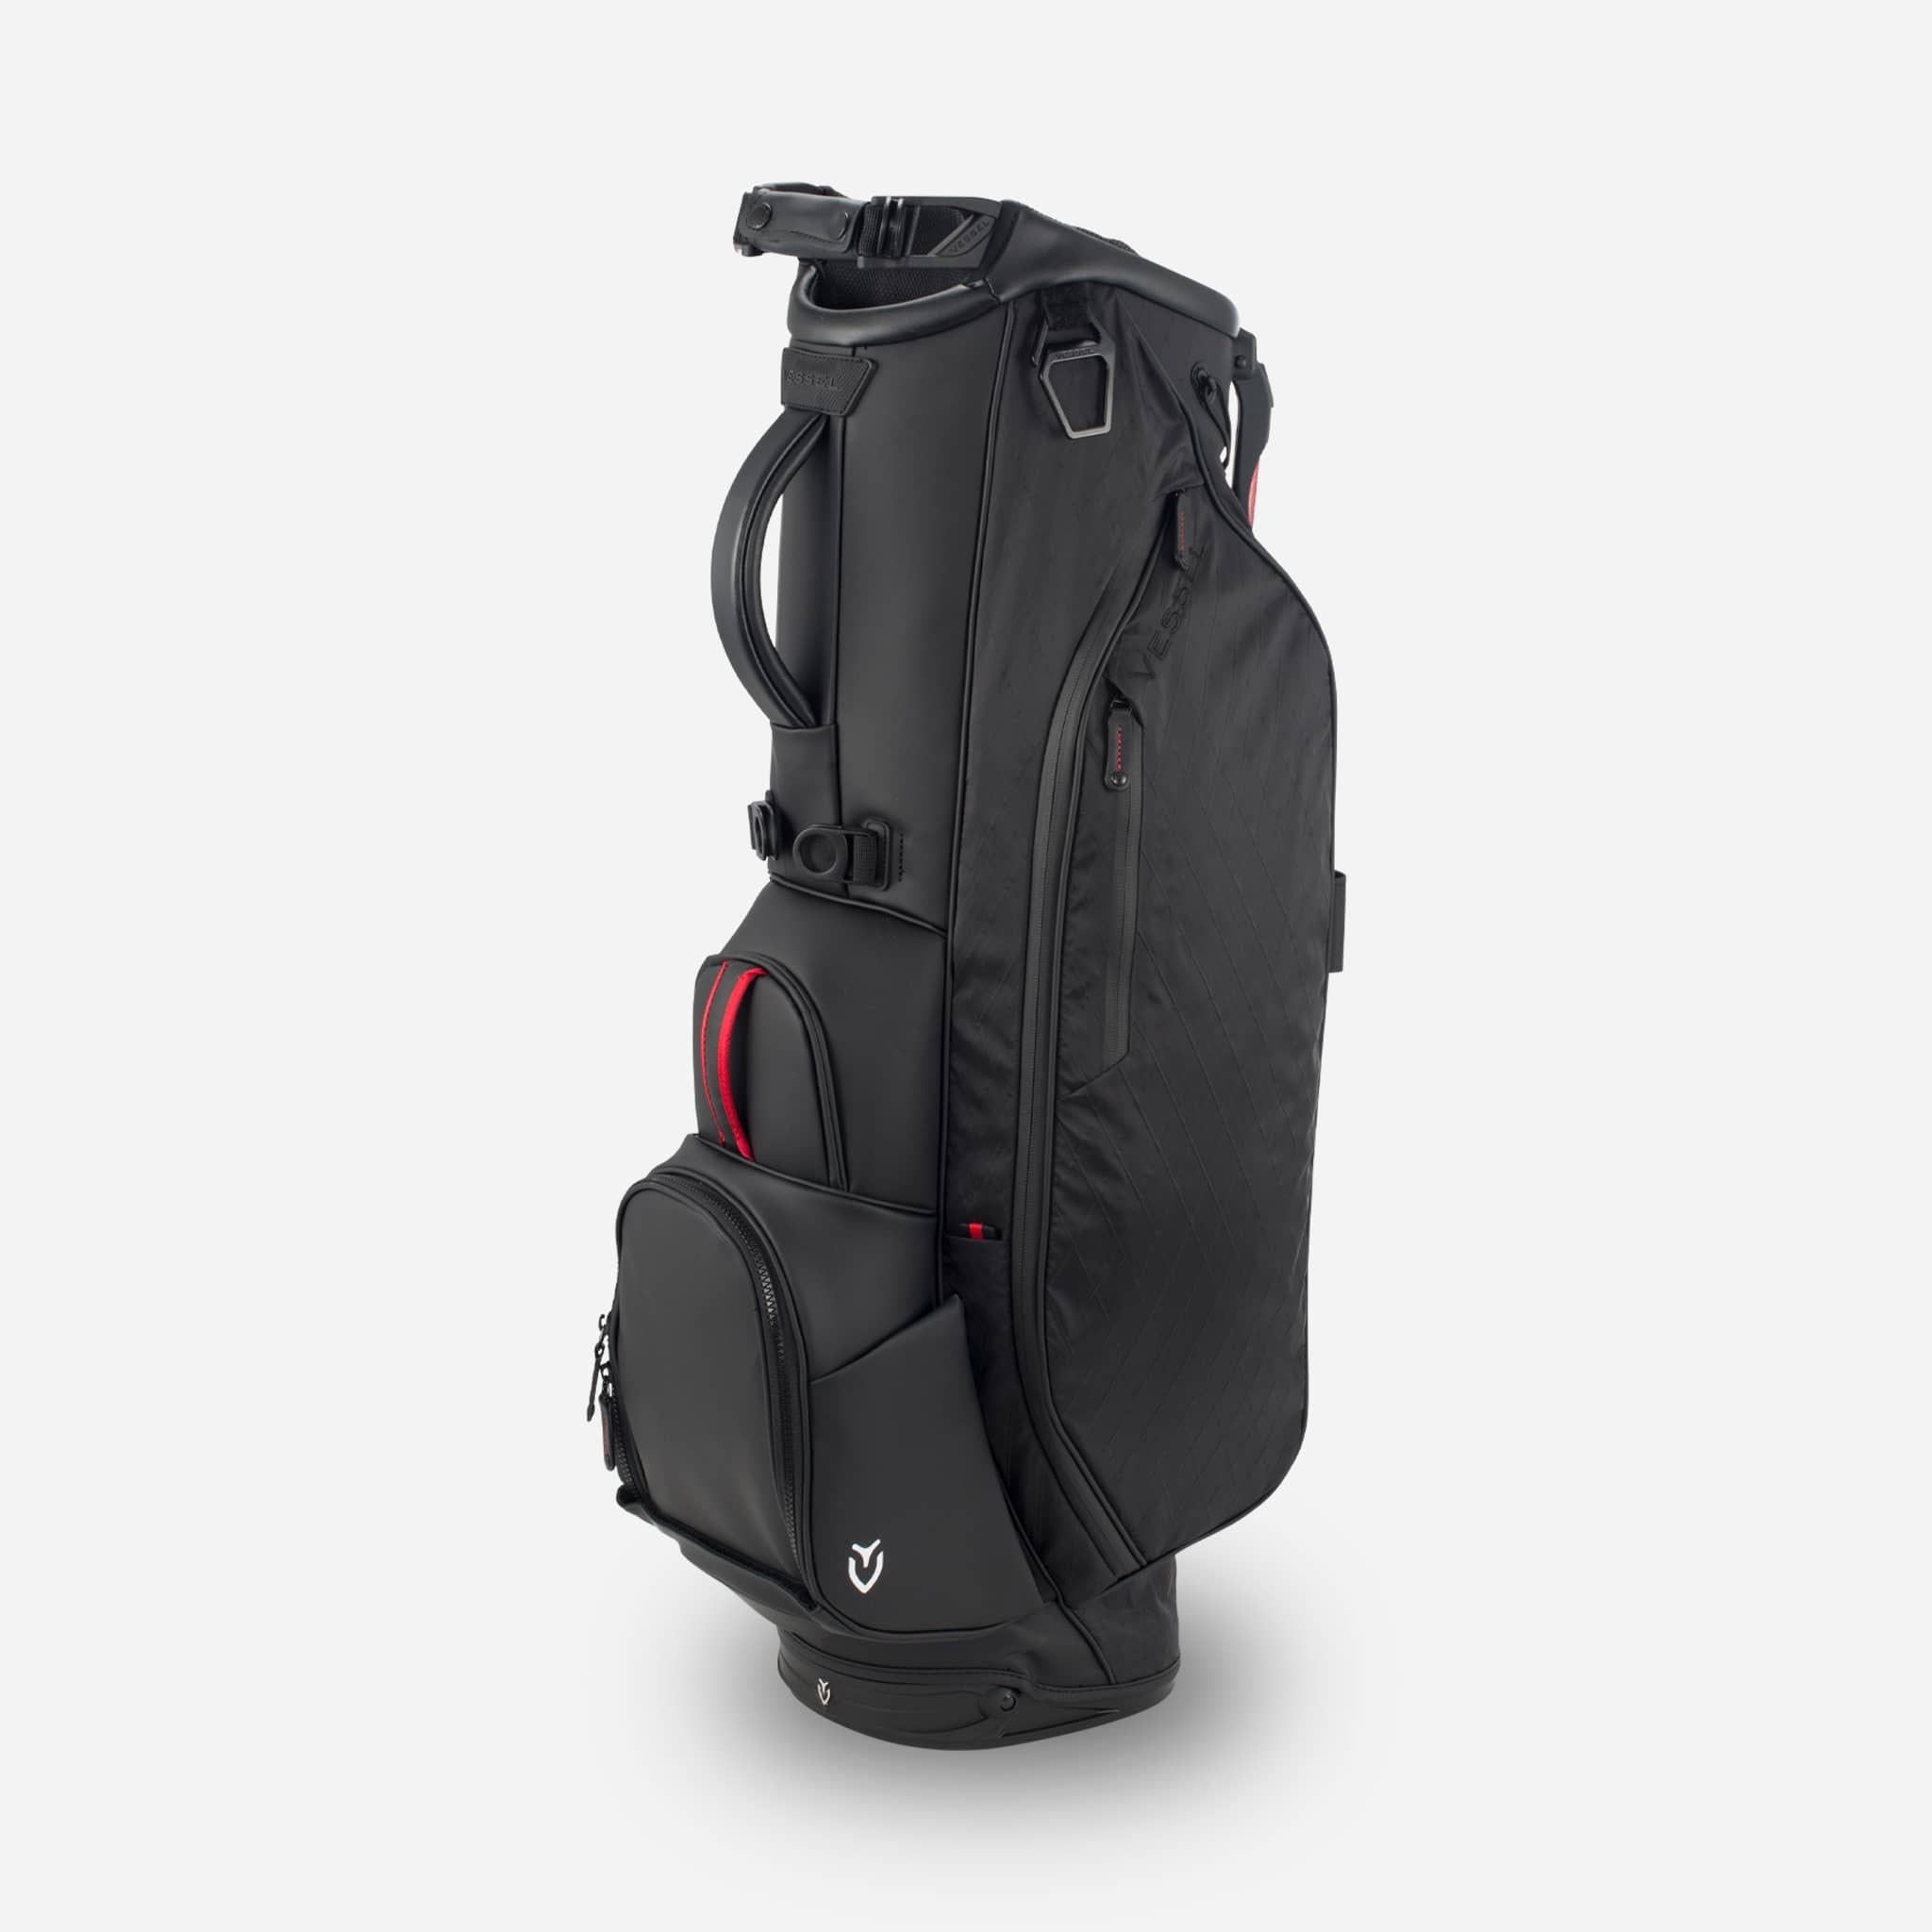 Right side view of black diamond ripstop golf stand bag with red accents.